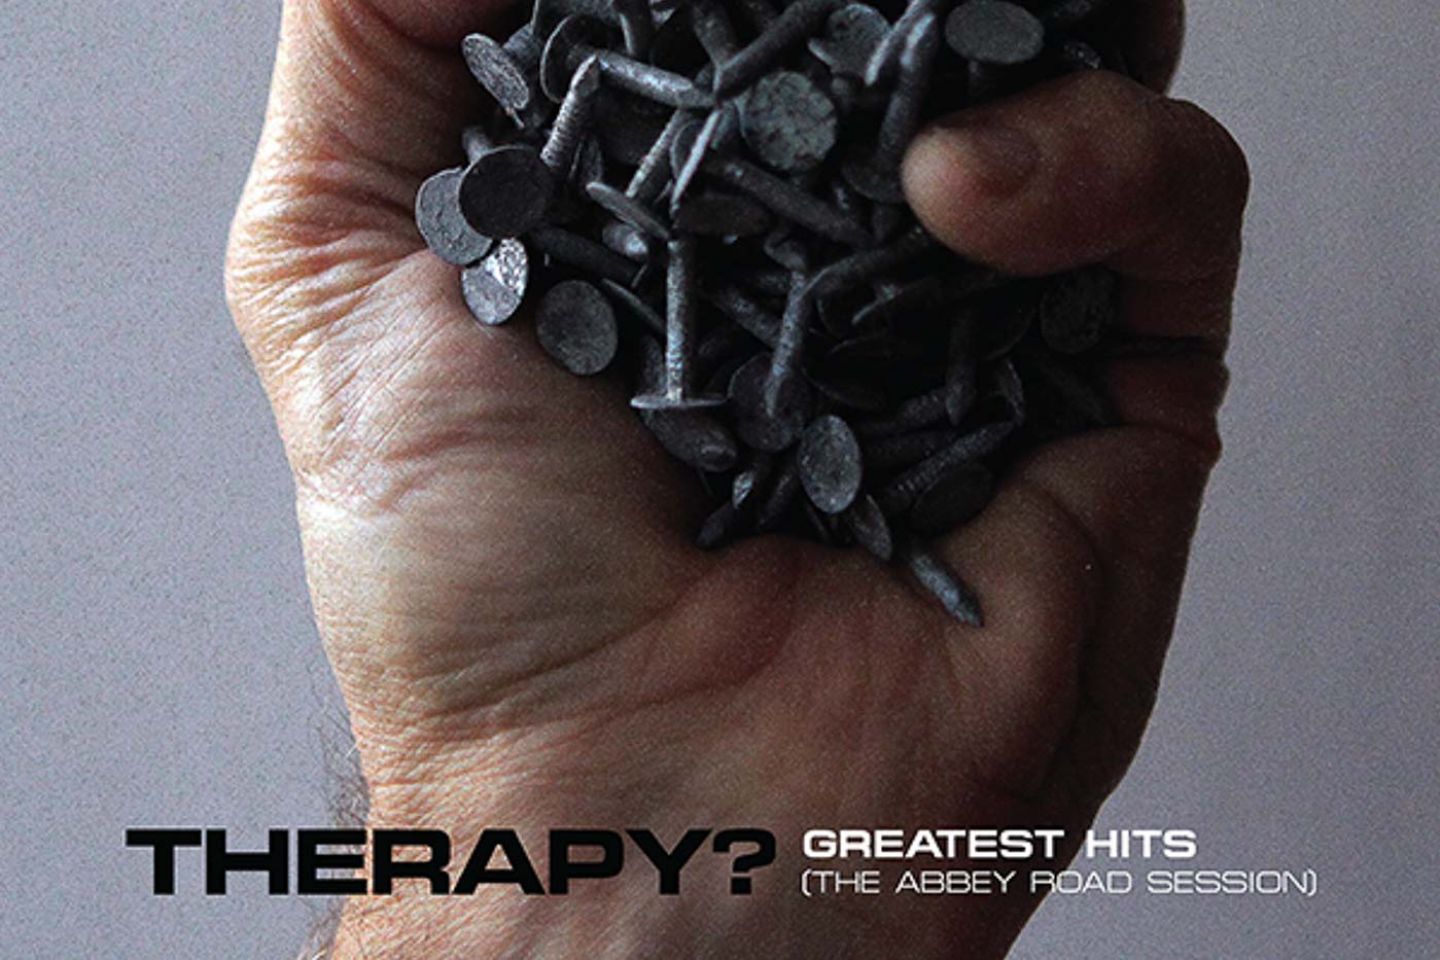 Therapy? “Greatest Hits (The Abbey Road Session)” (Marshall Records, 2020)